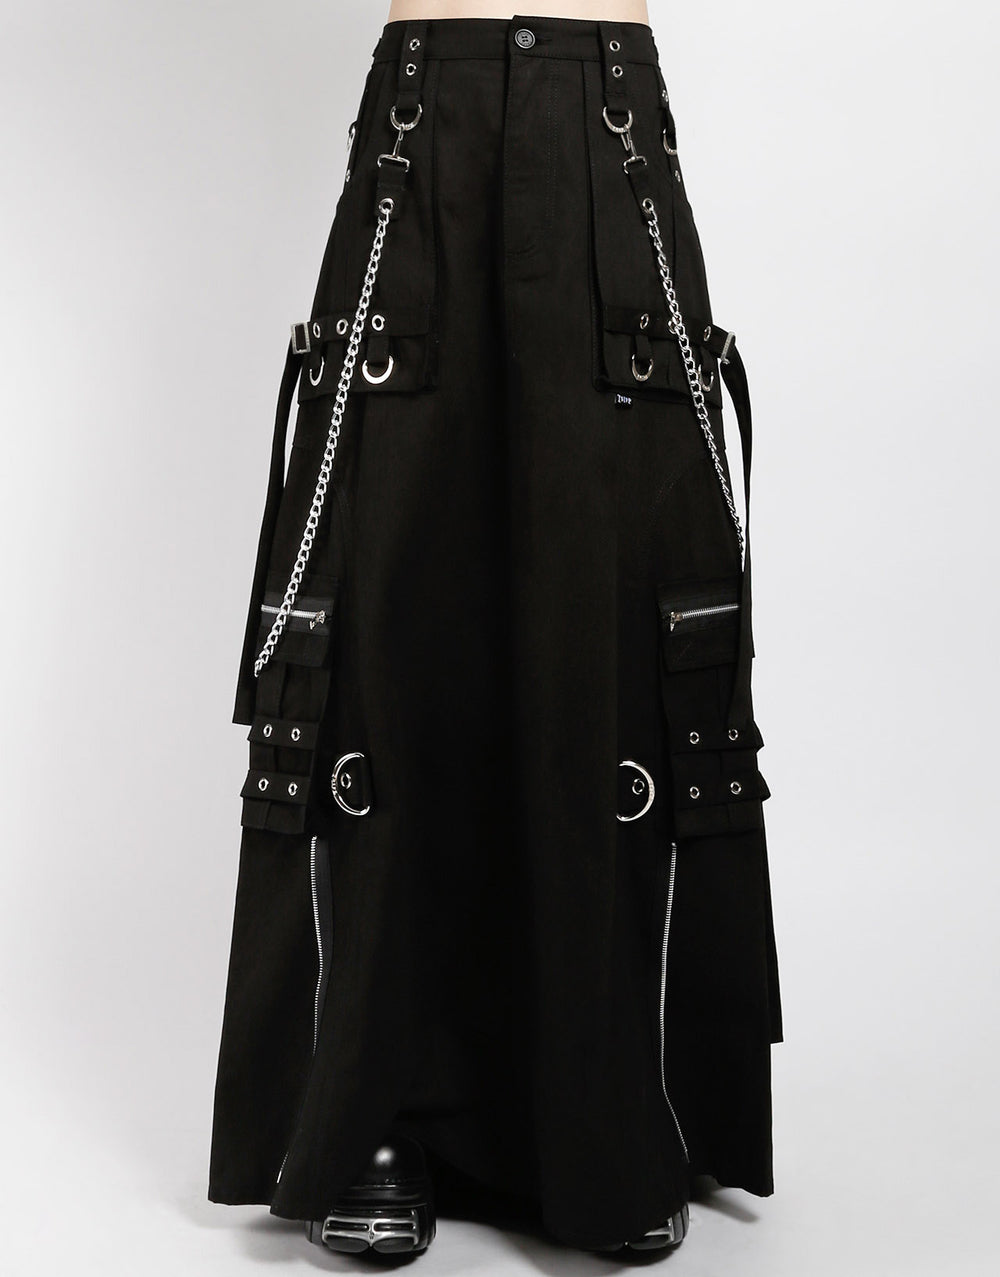 The front of the Strength Maxi Kilt on model.